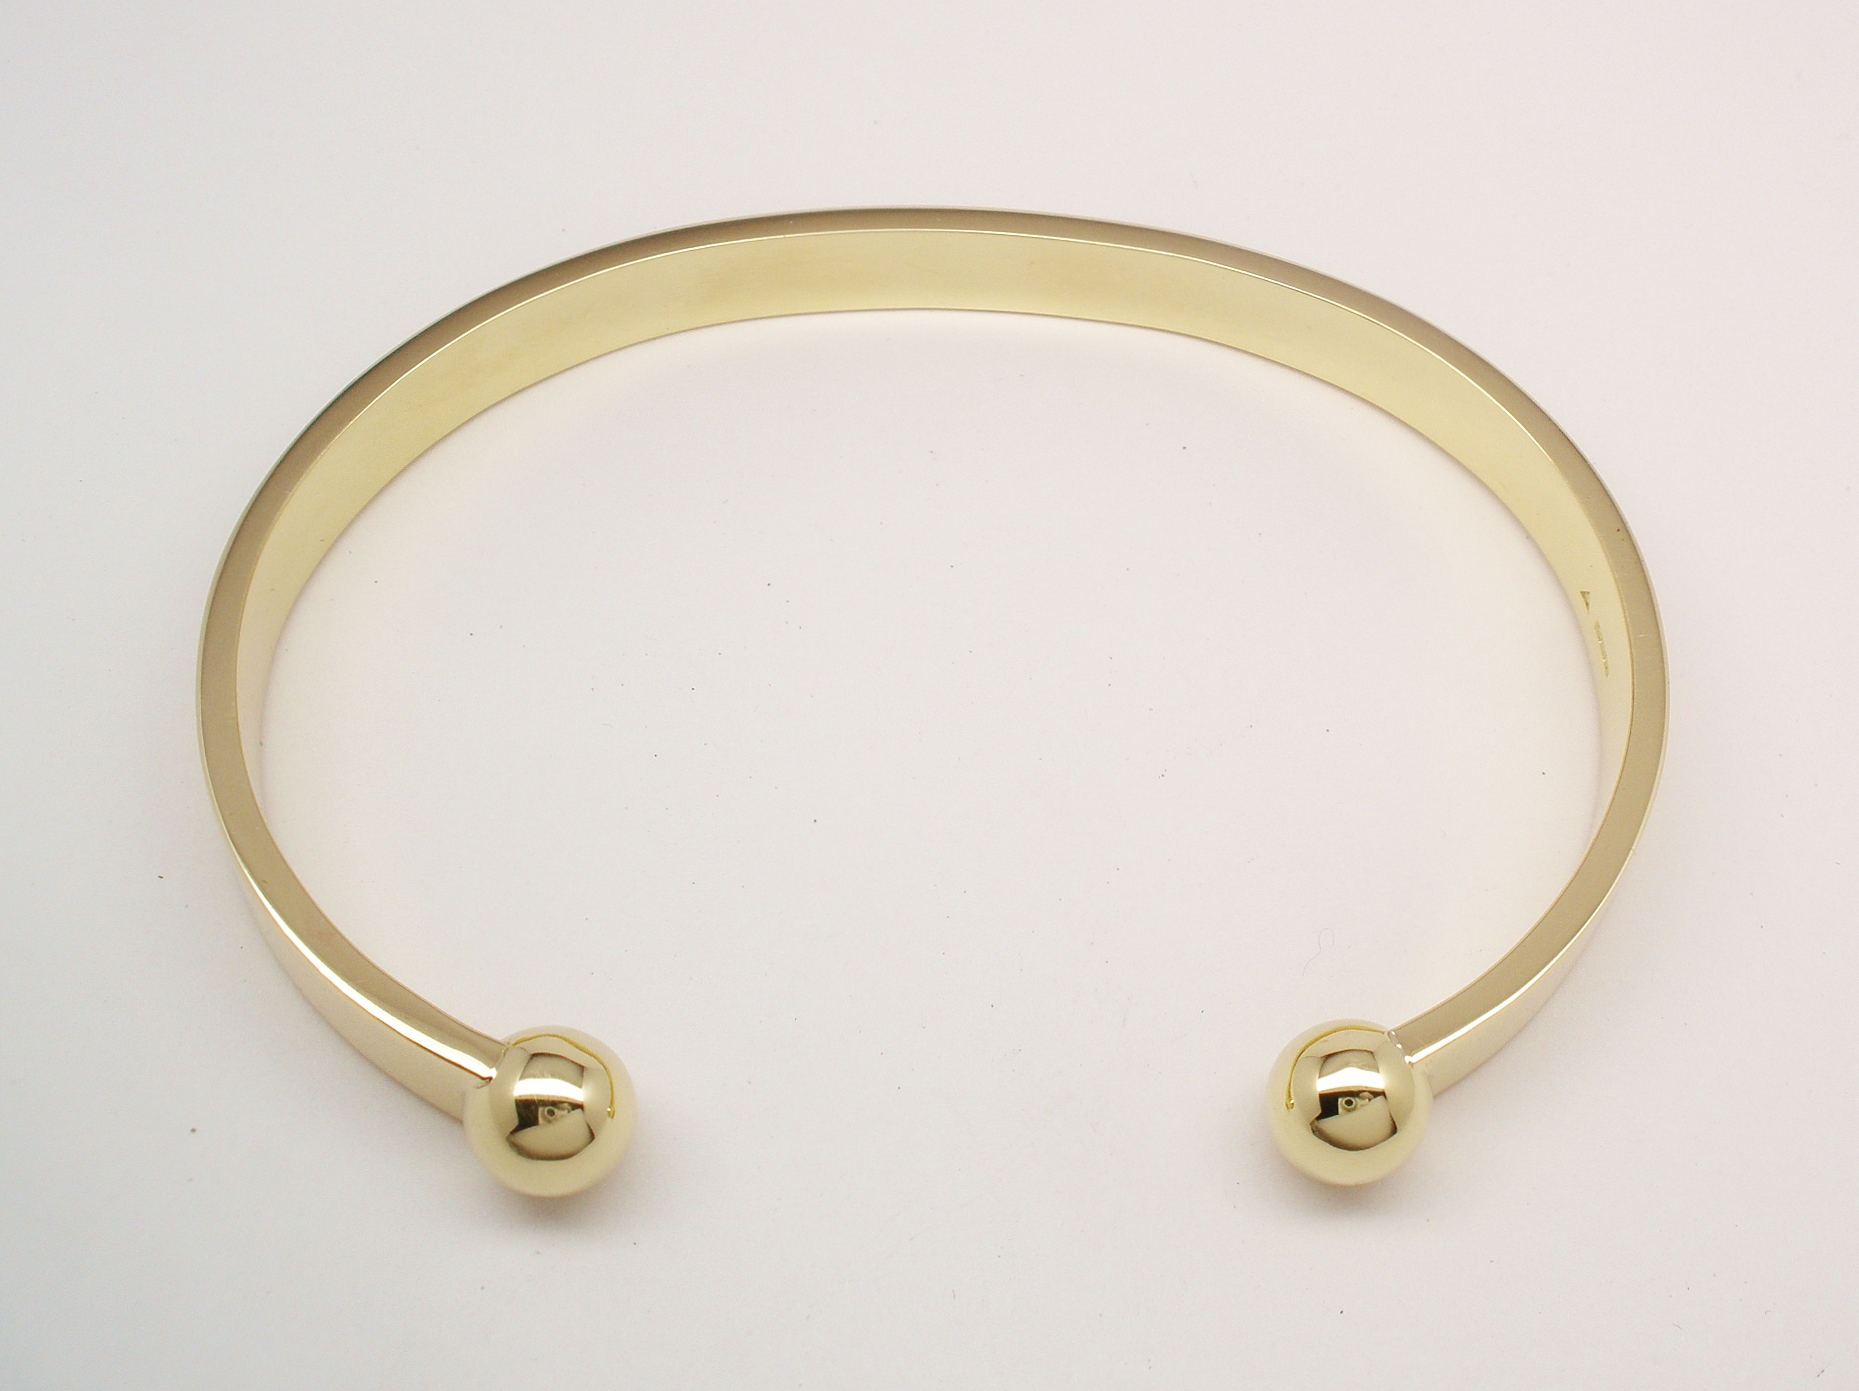 A gents 9ct yellow gold torque bangle with solid ball ends.